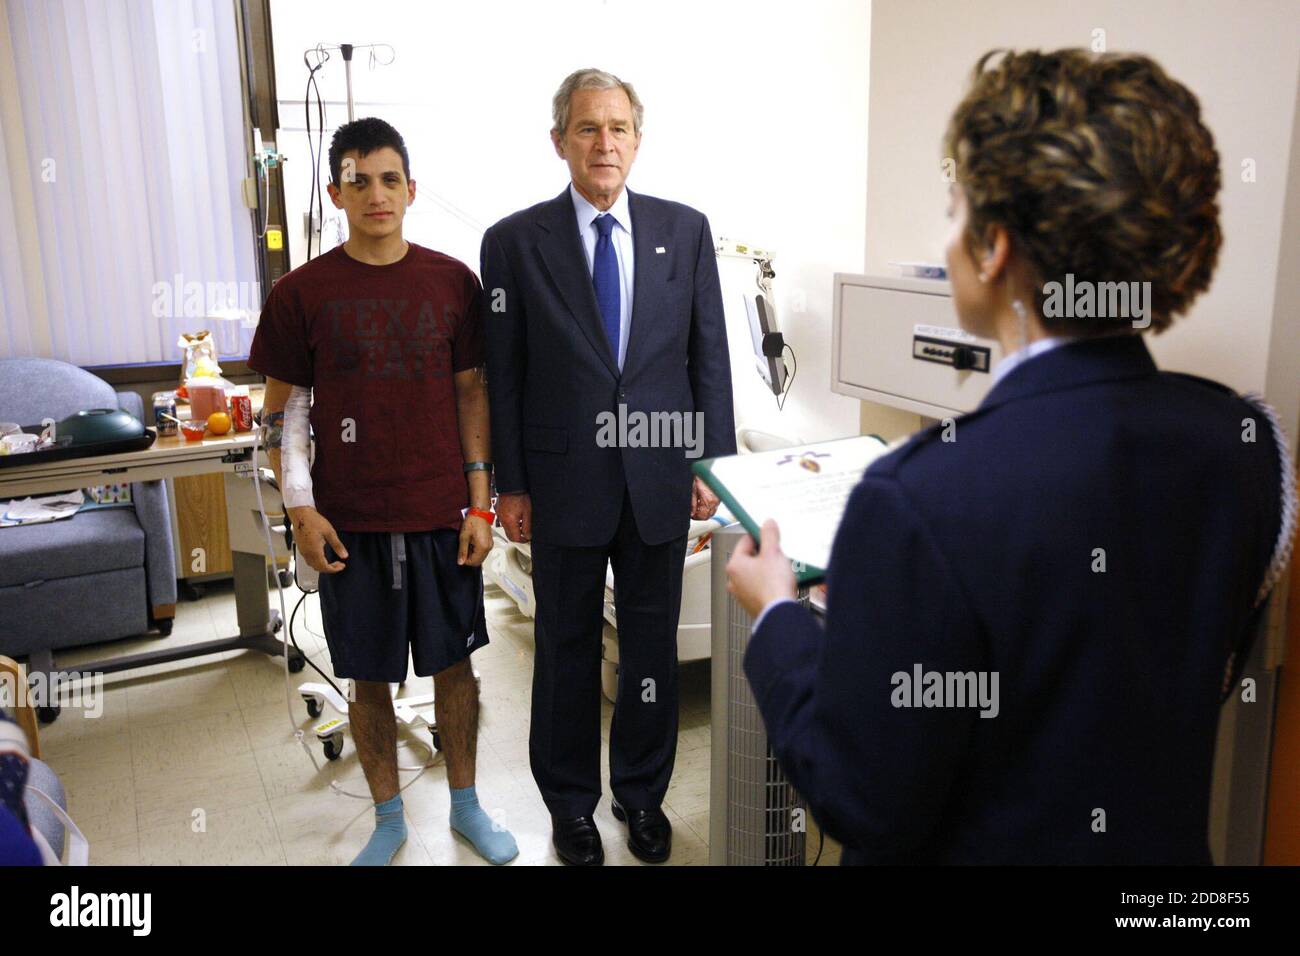 NO FILM, NO VIDEO, NO TV, NO DOCUMENTARY - US President George W. Bush meets with U.S. Specialist Fernando Aguilar of Tucson, Ariz., who was presented with a Purple Heart, during a visit to Walter Reed Army Medical Center in Washington, DC, USA on Monday, December 22, 2008. Photo by Eric Draper/White House/MCT/ABACAPRESS.COM Stock Photo